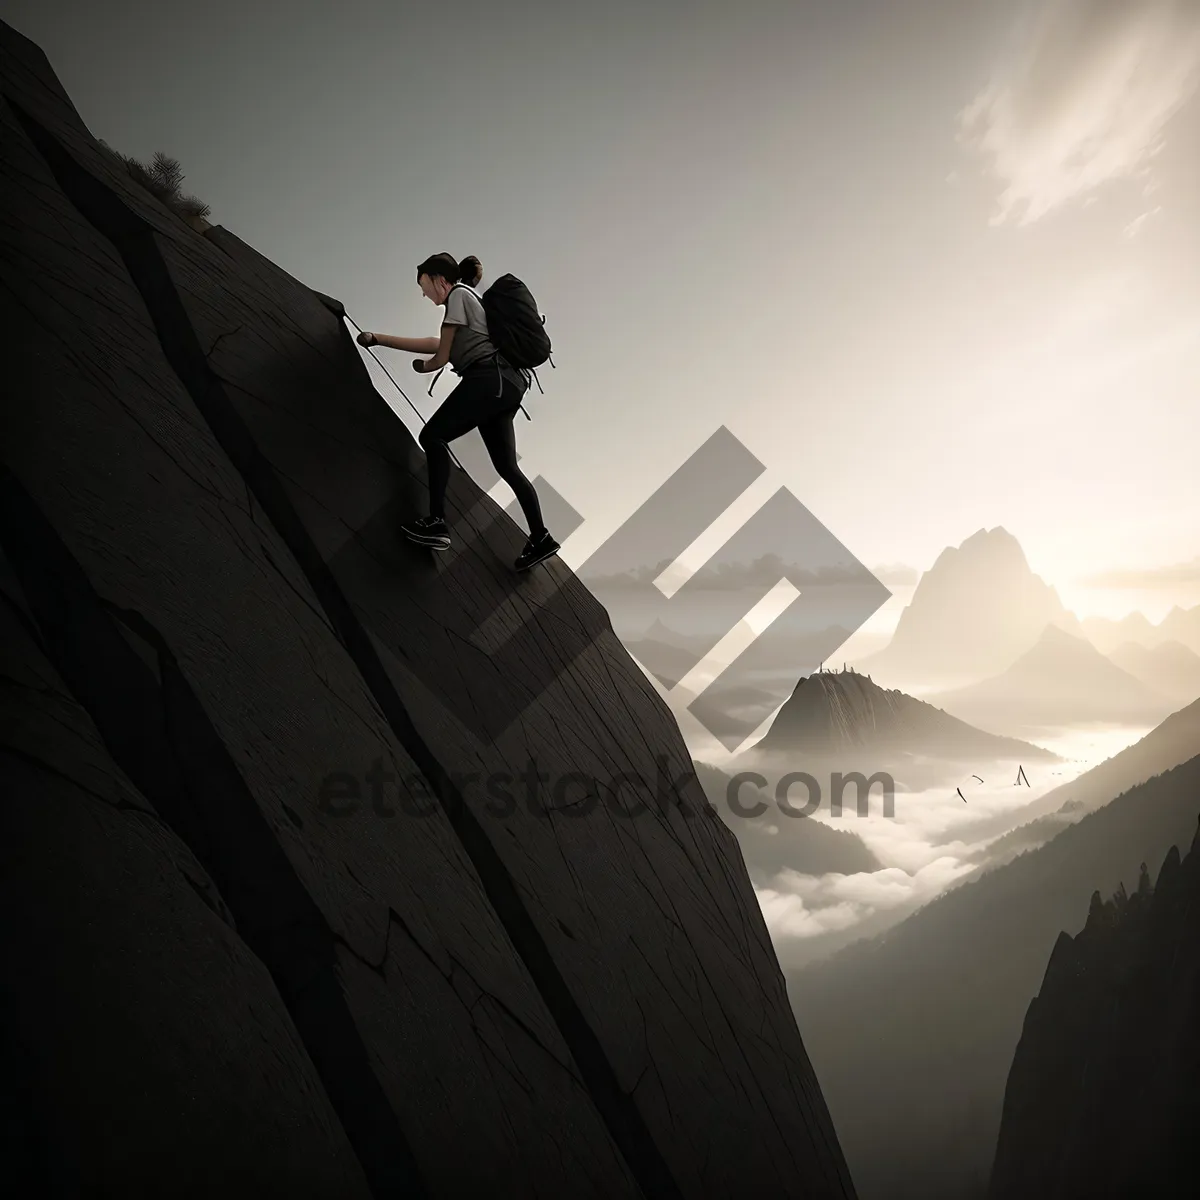 Picture of Thrilling Mountain Climb amidst Majestic Peaks